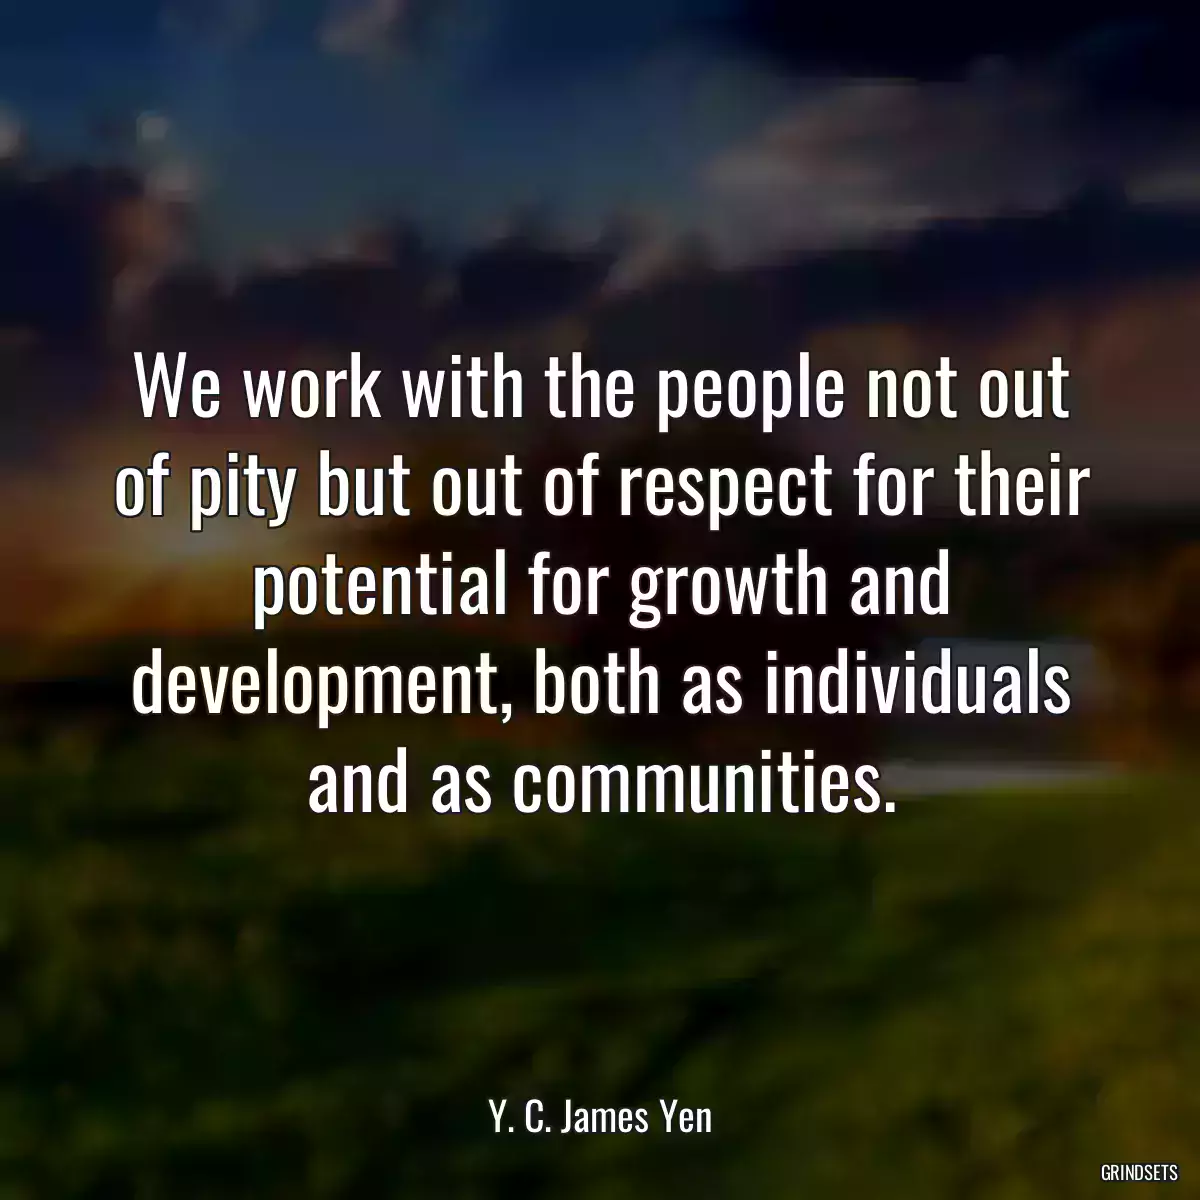 We work with the people not out of pity but out of respect for their potential for growth and development, both as individuals and as communities.